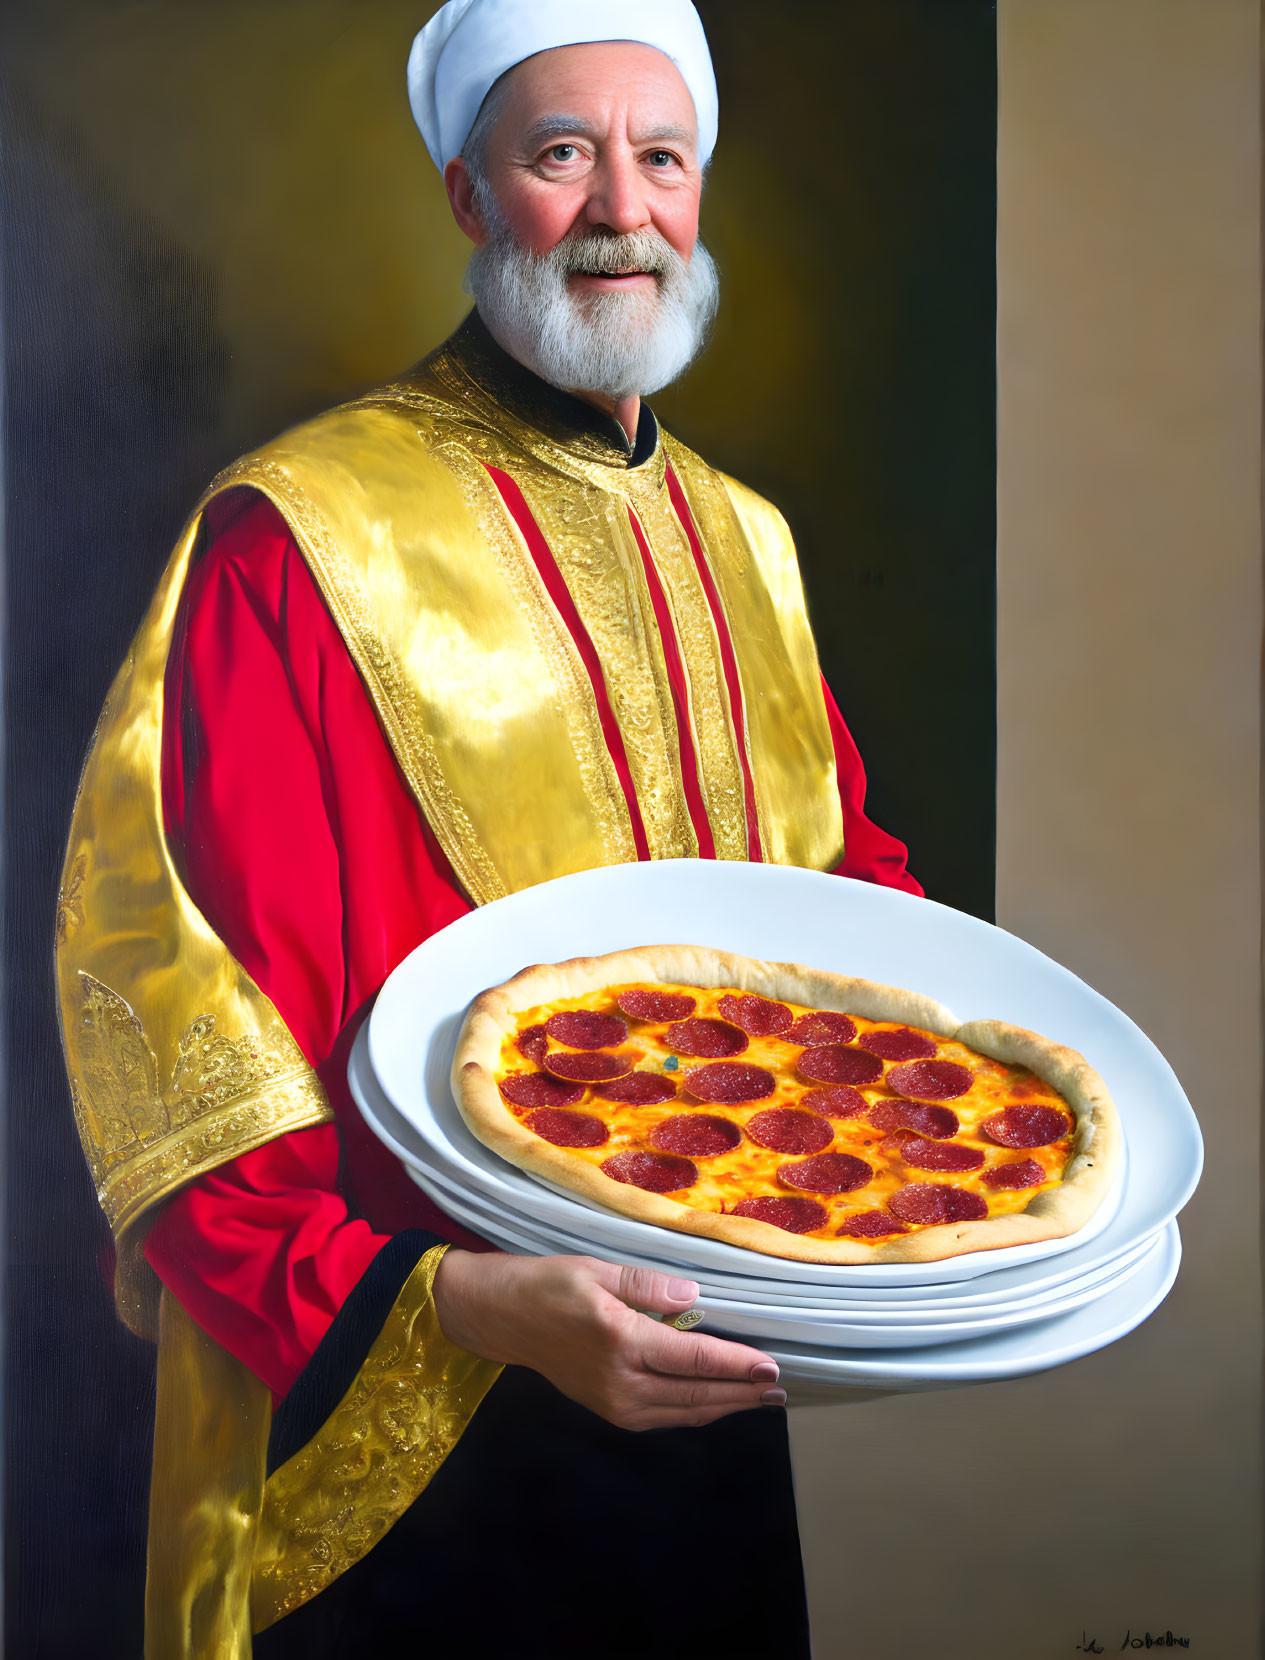 Smiling man in red and gold robe with stack of plates and pizza